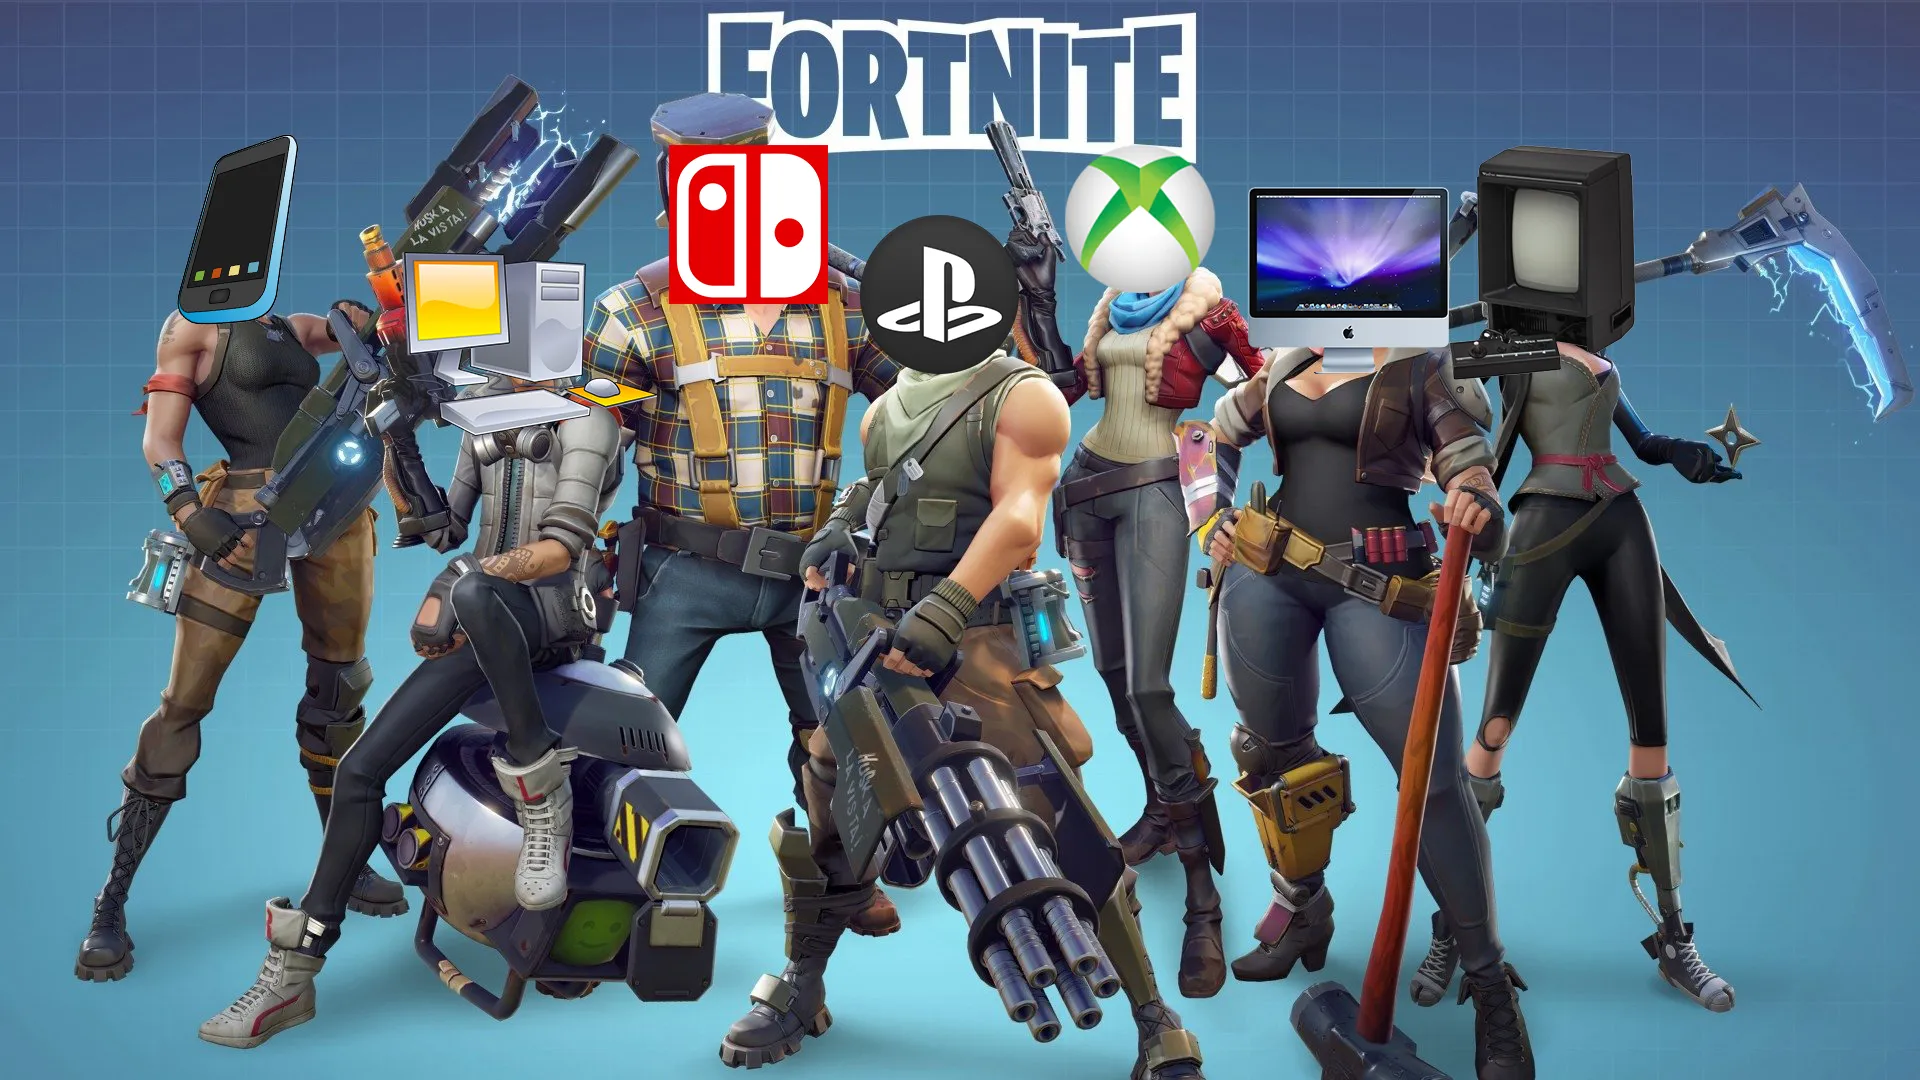 How to Play Fortnite on PS4